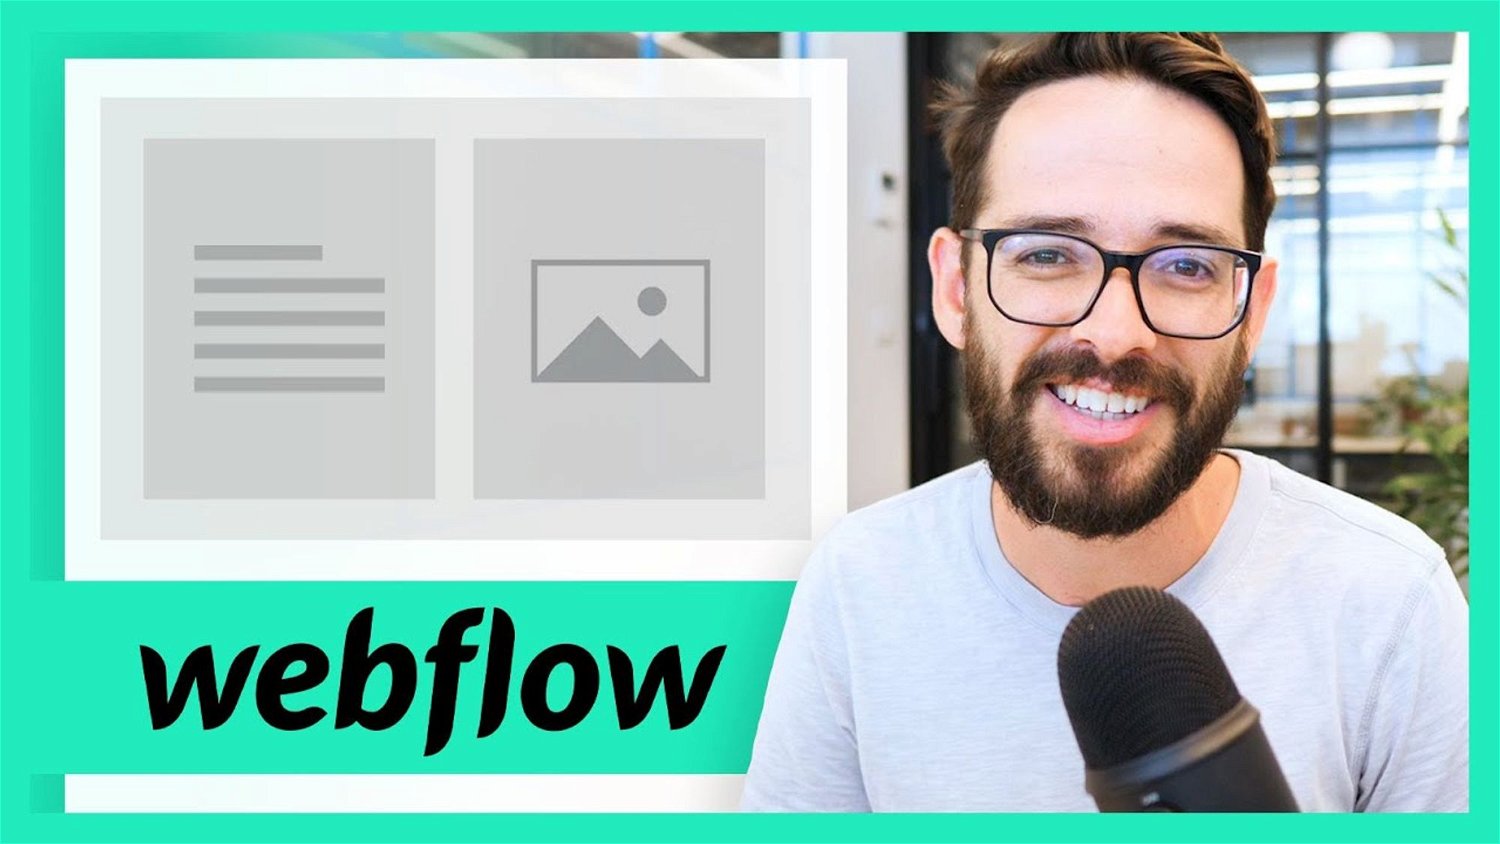 How To Structure Websites Efficiently With Webflow